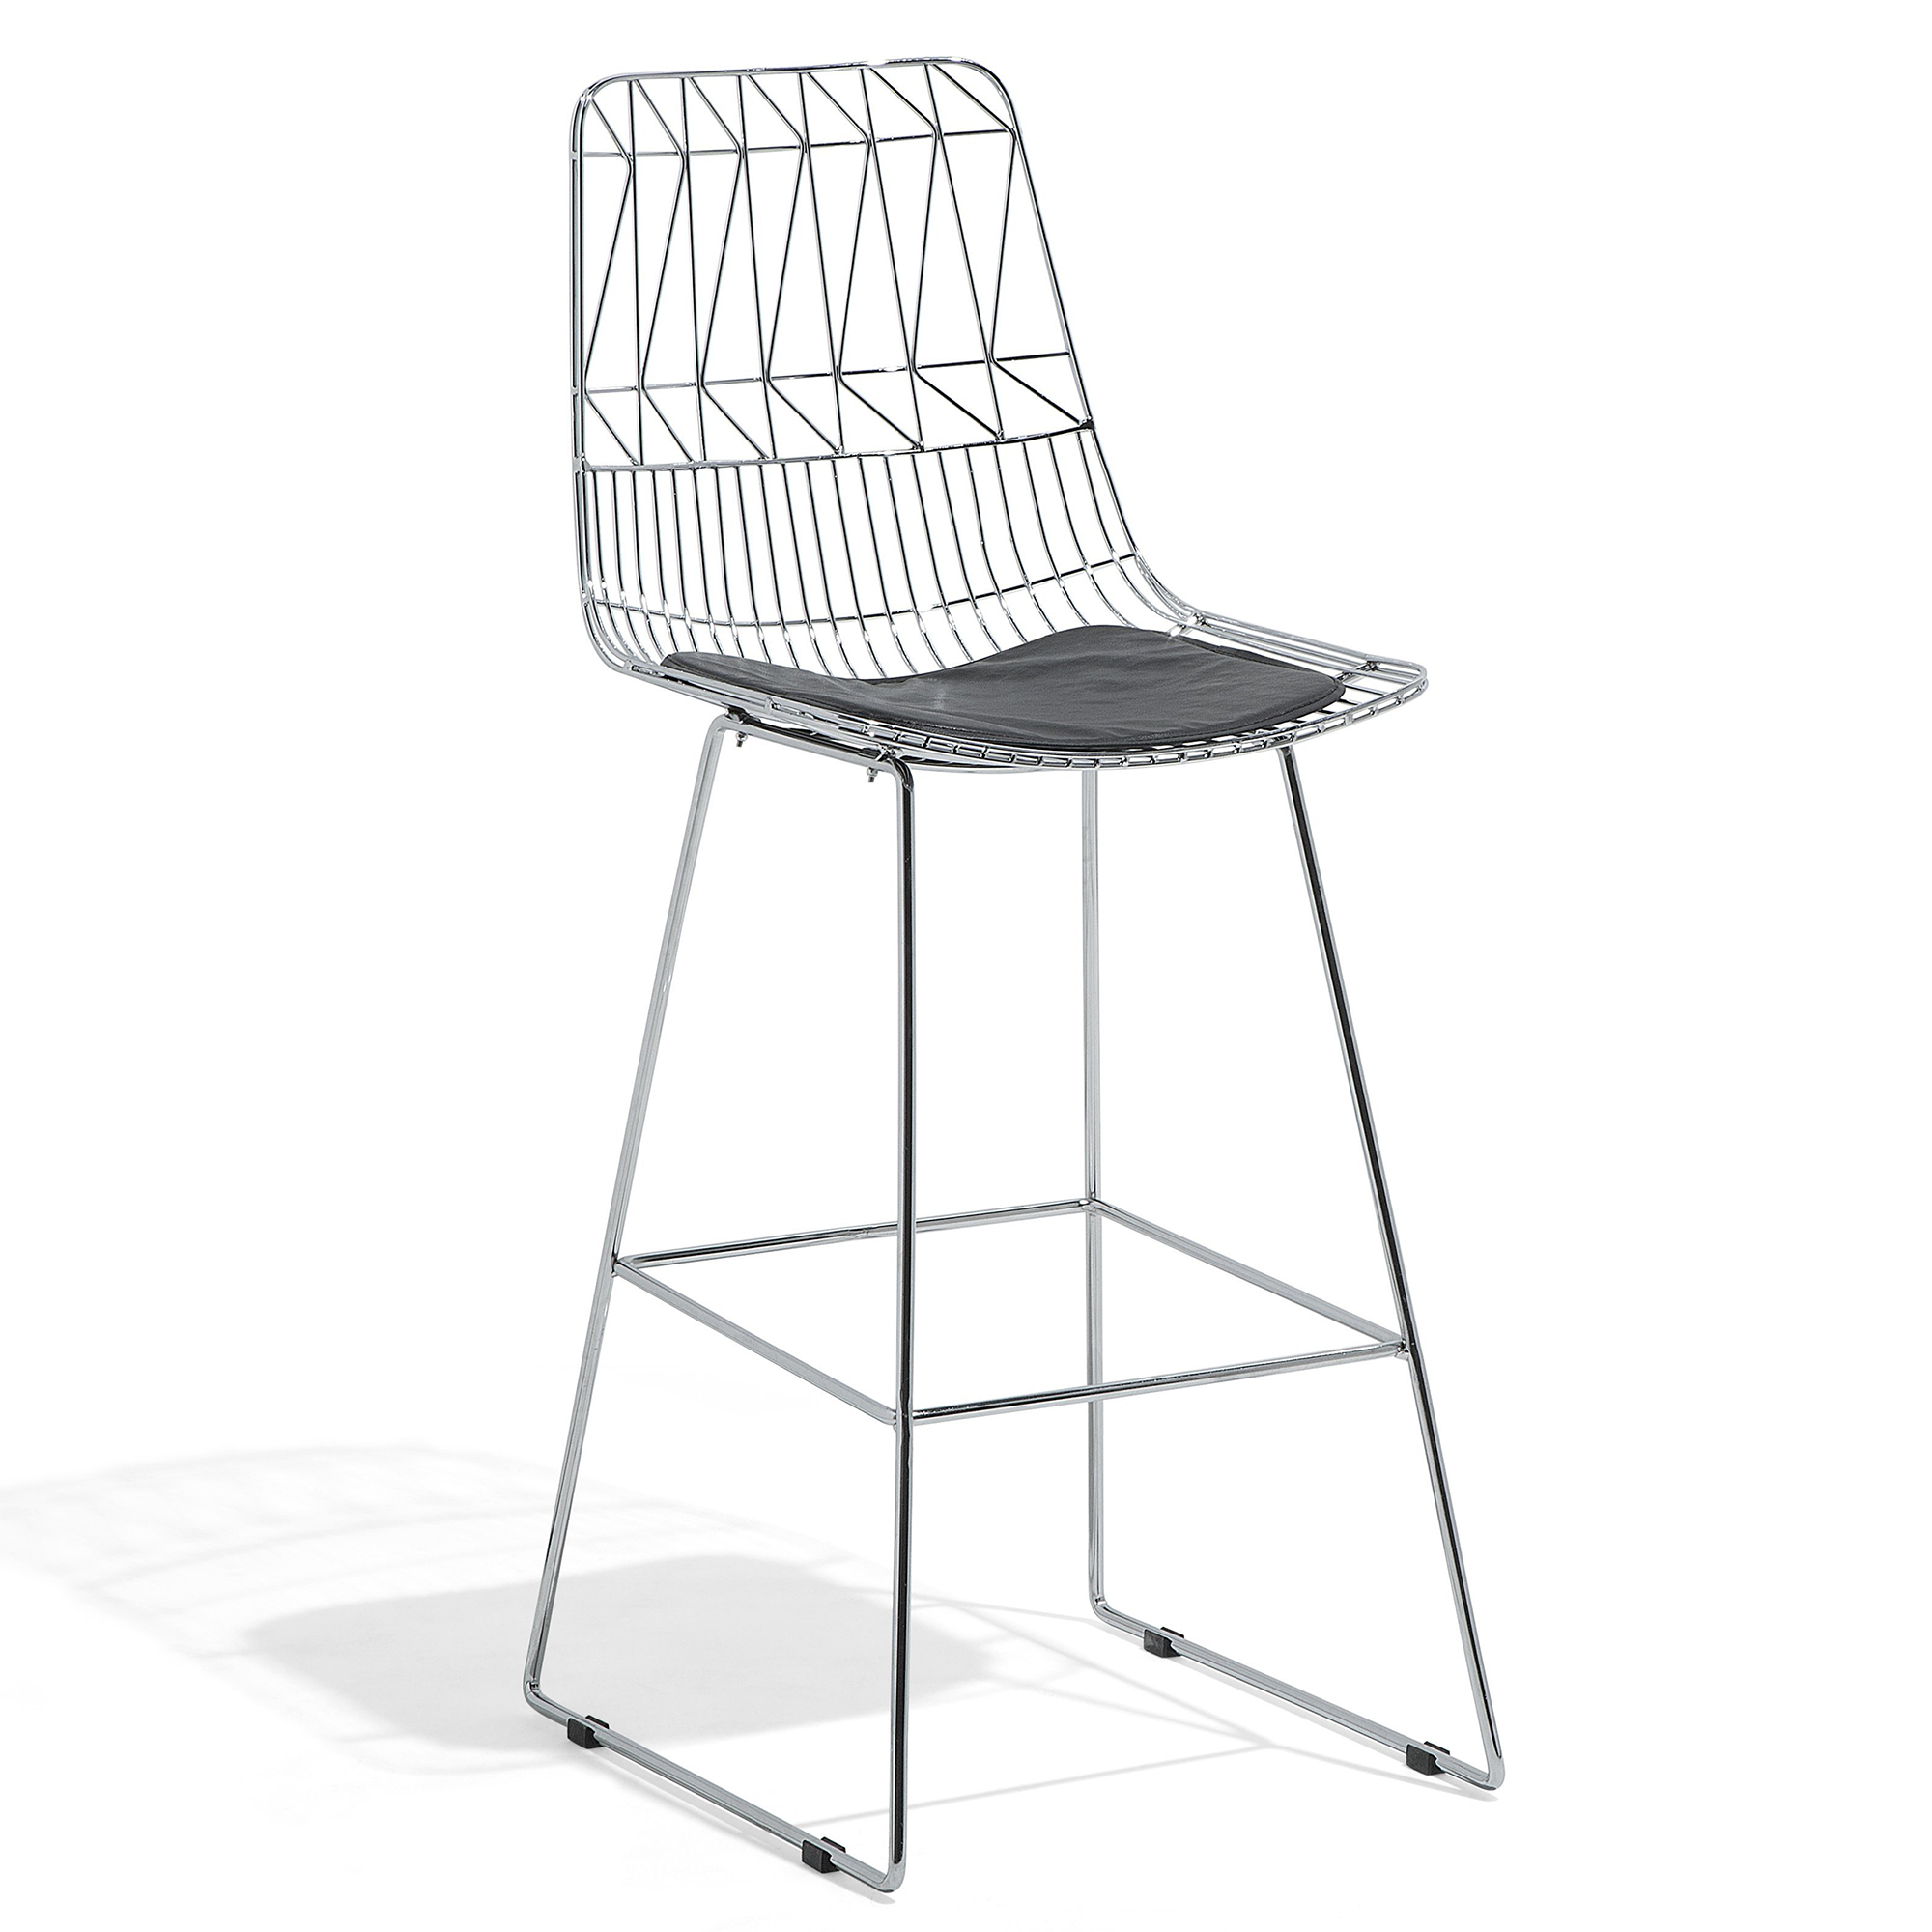 Beliani Bar Chair Silver Steel Frame Faux Leather Seat Counter Height Slatted Back Modern Design